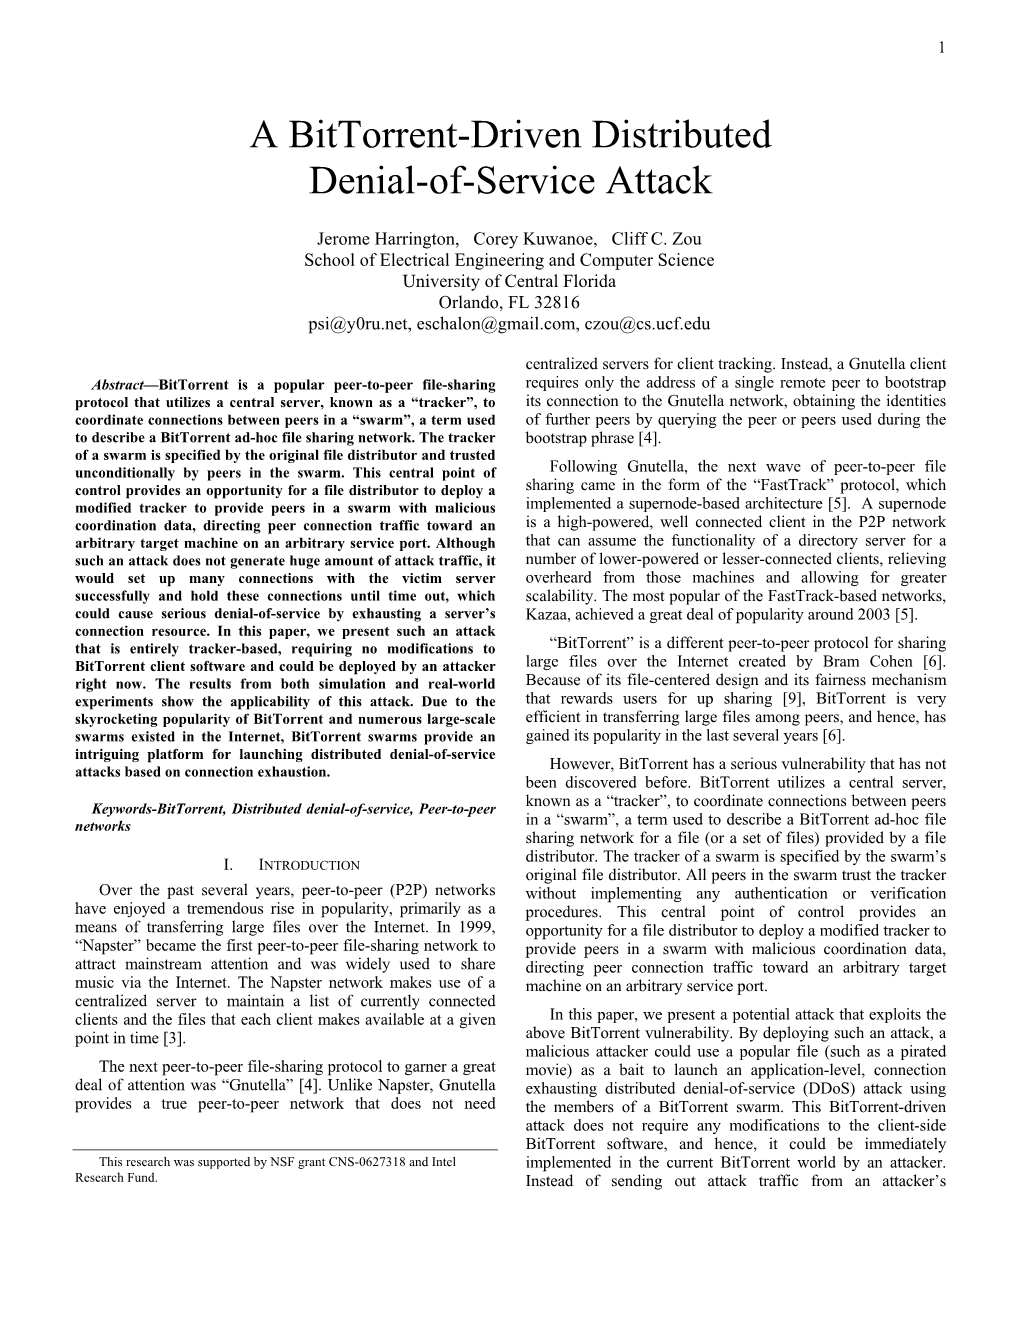 A Bittorrent-Driven Distributed Denial-Of-Service Attack